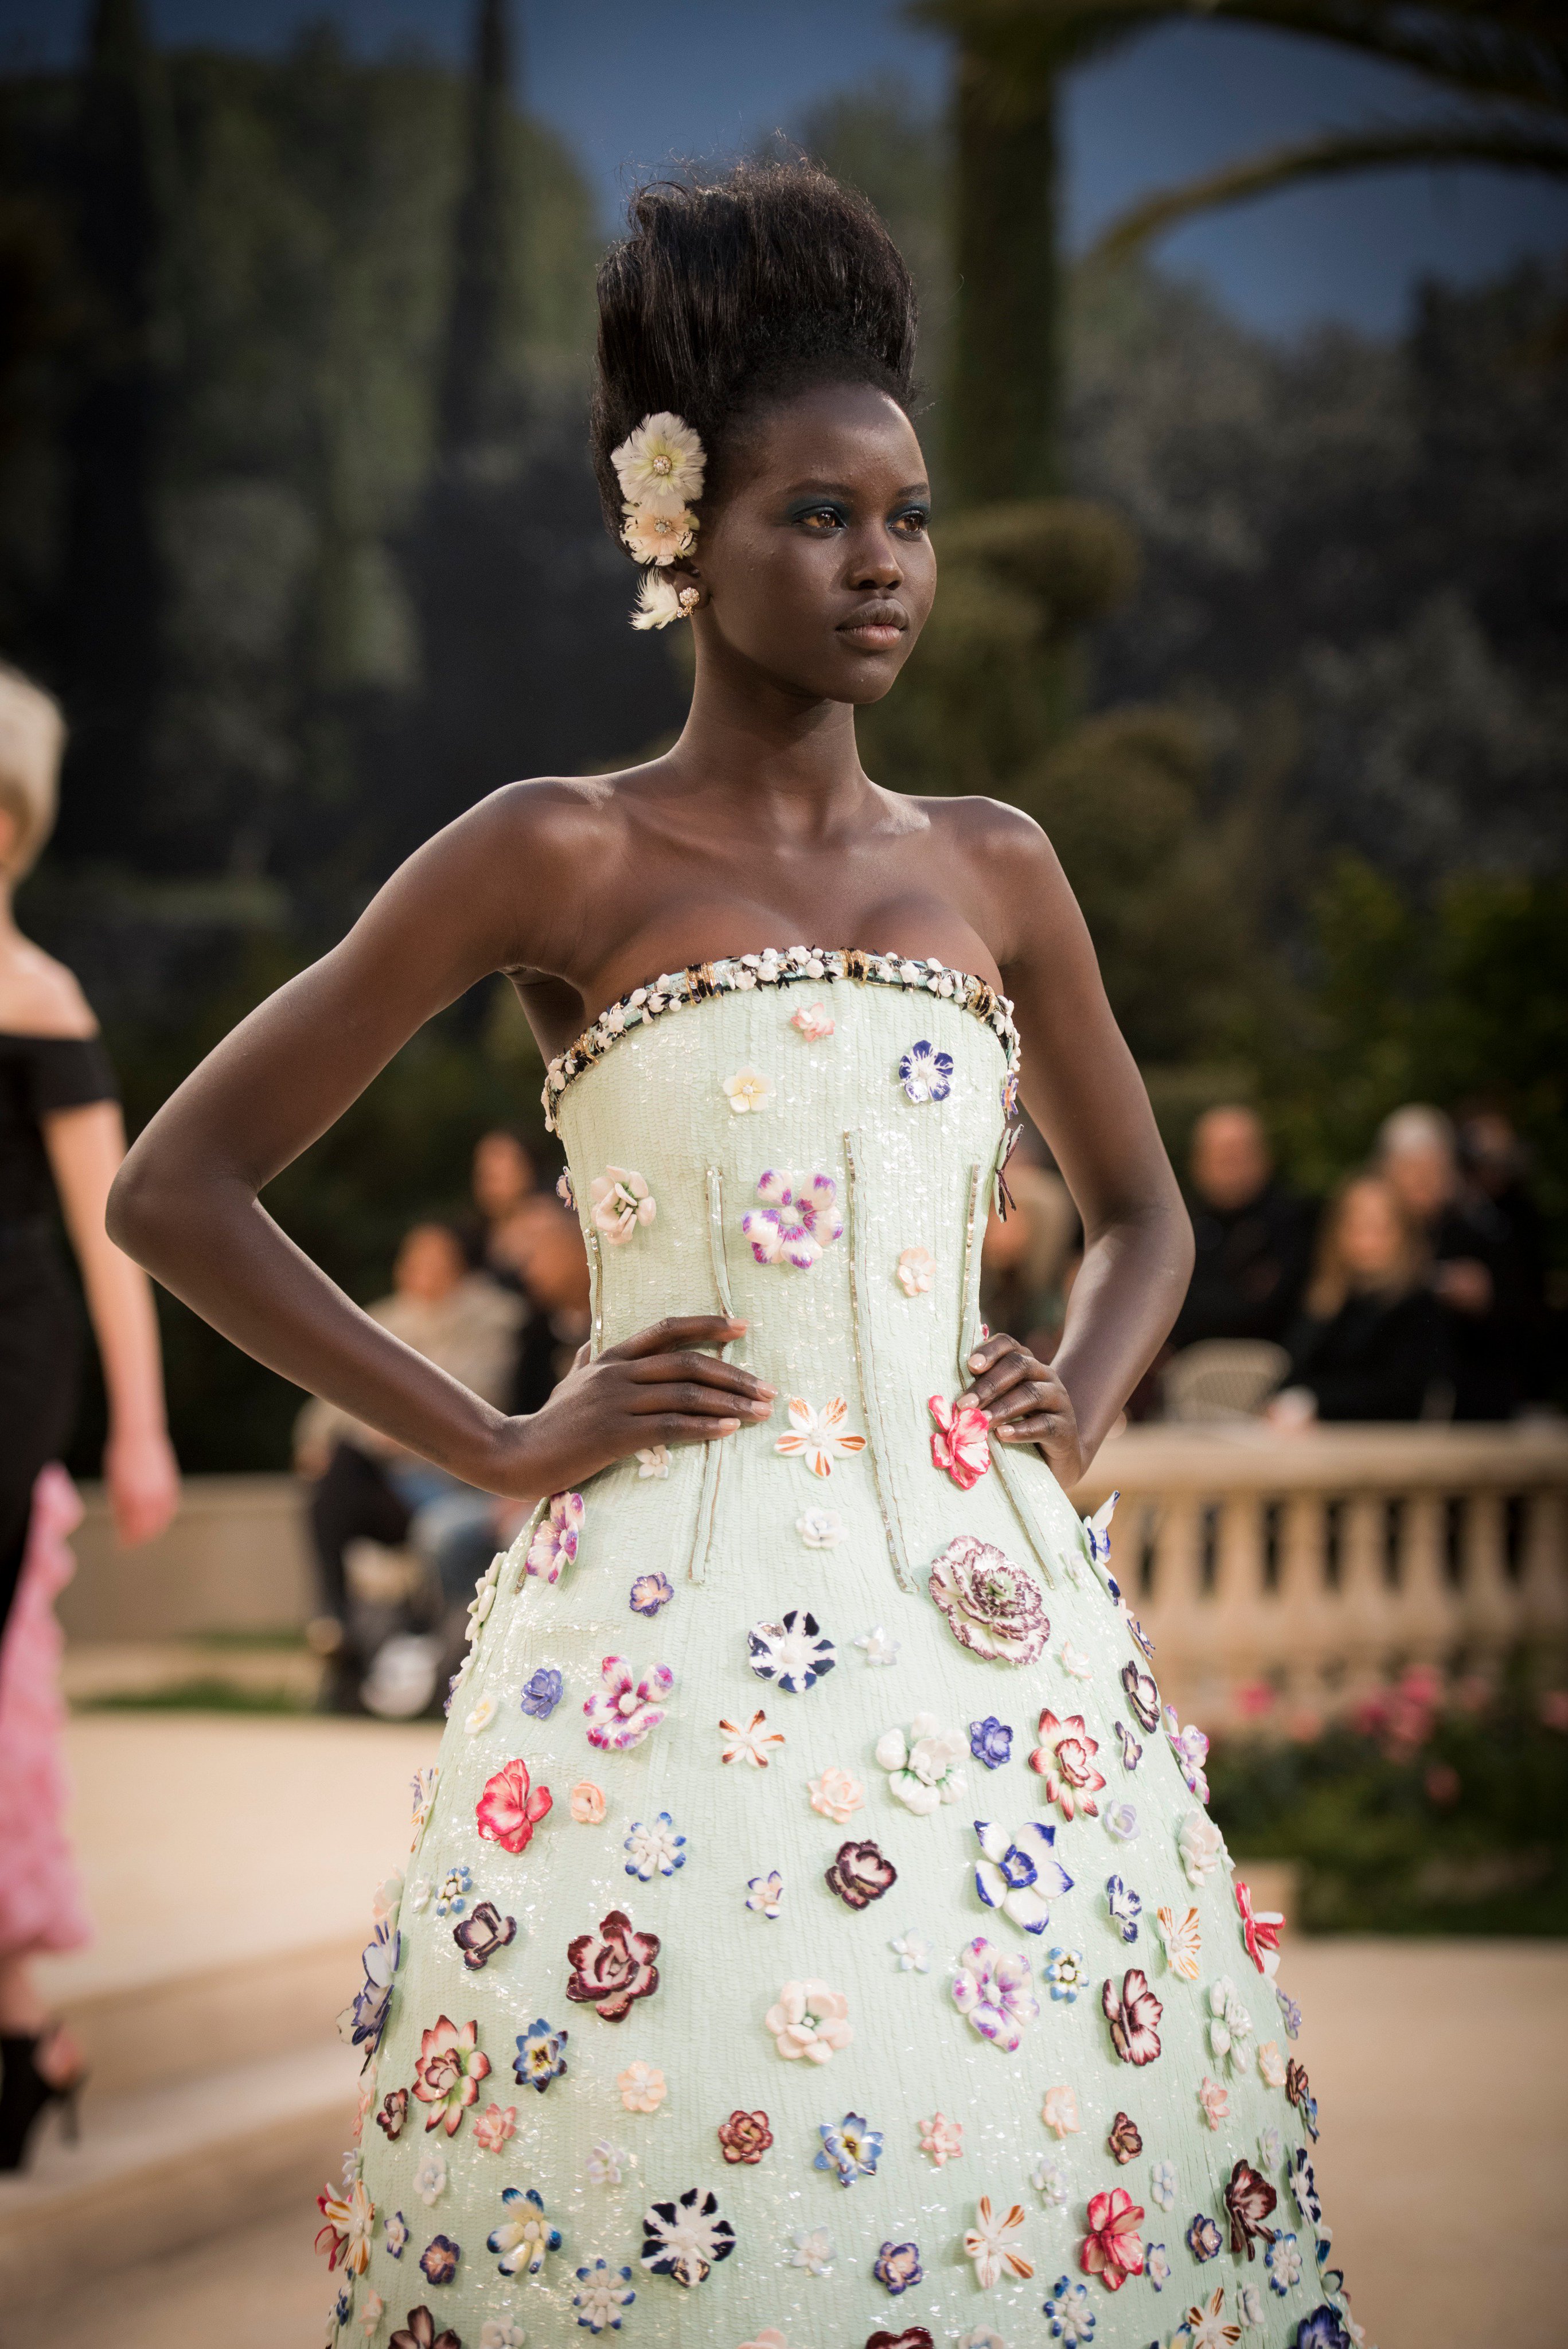 CHANEL on Twitter: "Flowers bloom in multiple shades and textures for Spring-Summer 2019. Constantly seeking innovation, the #CHANELHauteCouture CHANEL's Métiers d'art ateliers created hand-painted ceramic flowers that were then added to